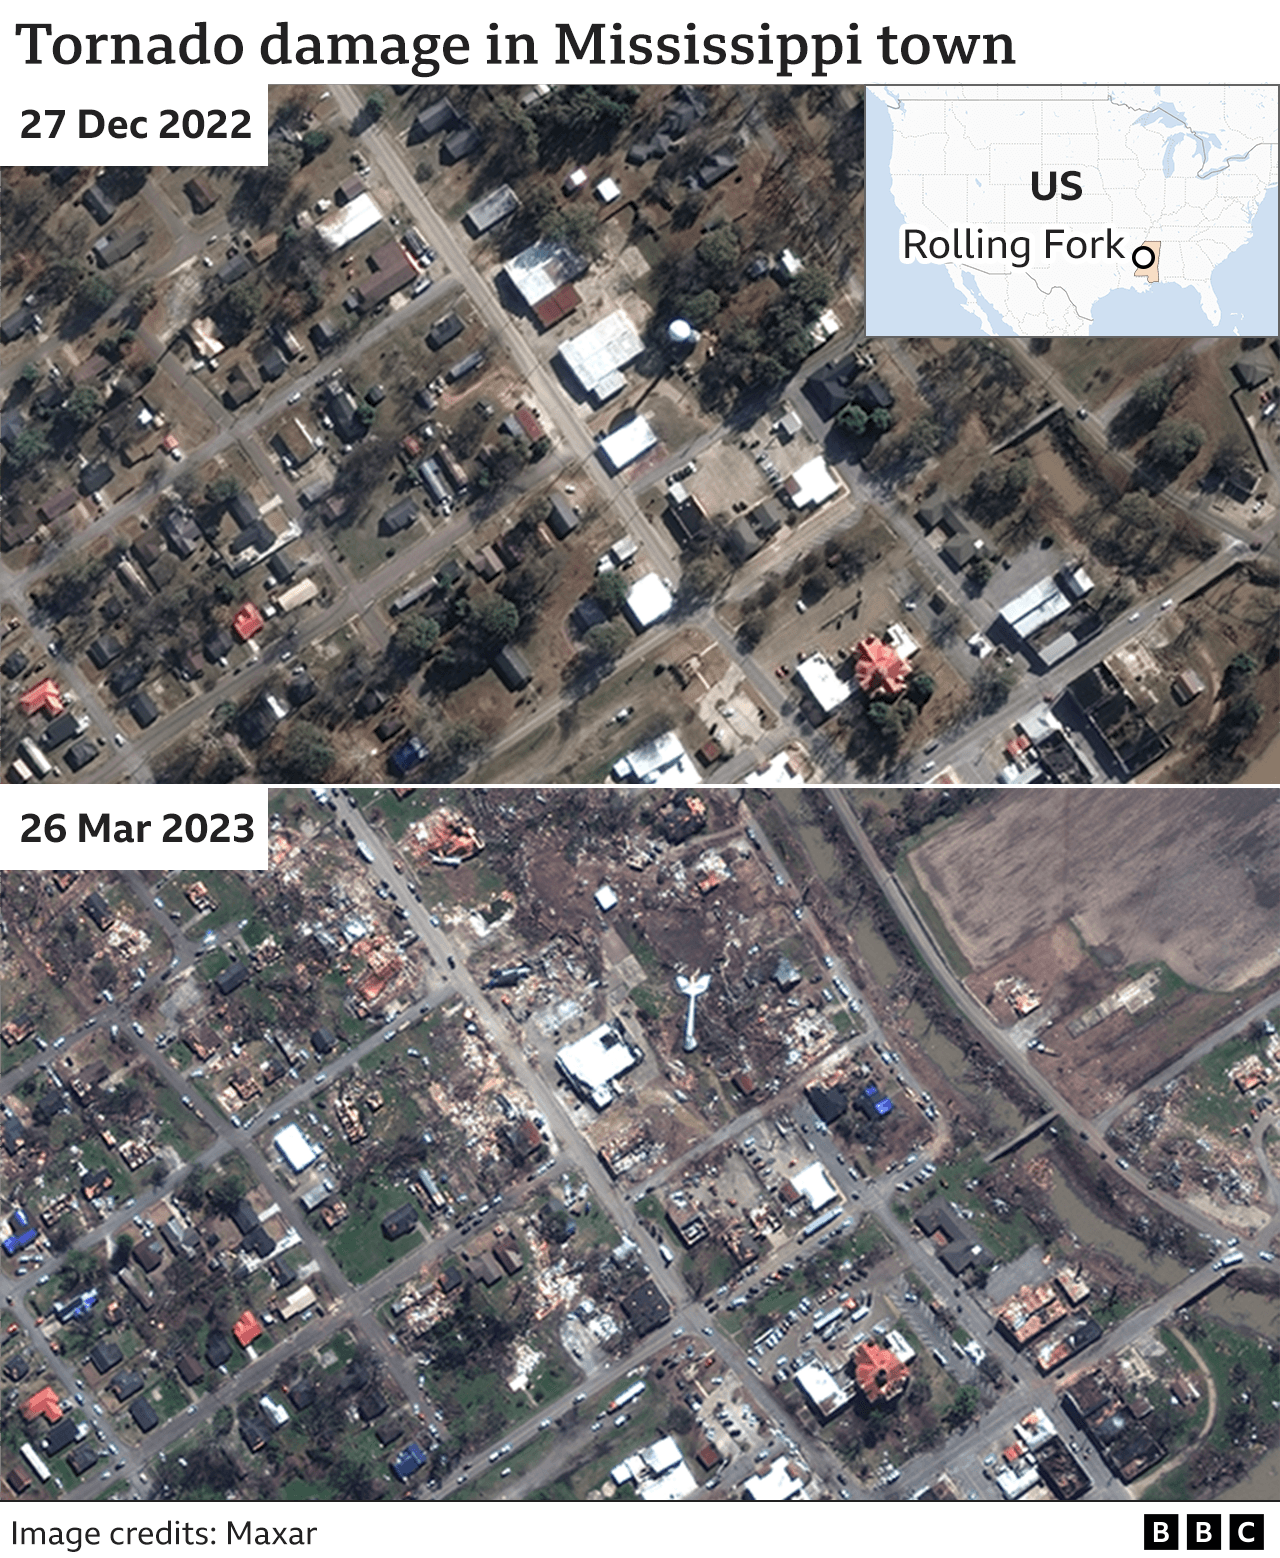 Satellite image before and after tornado